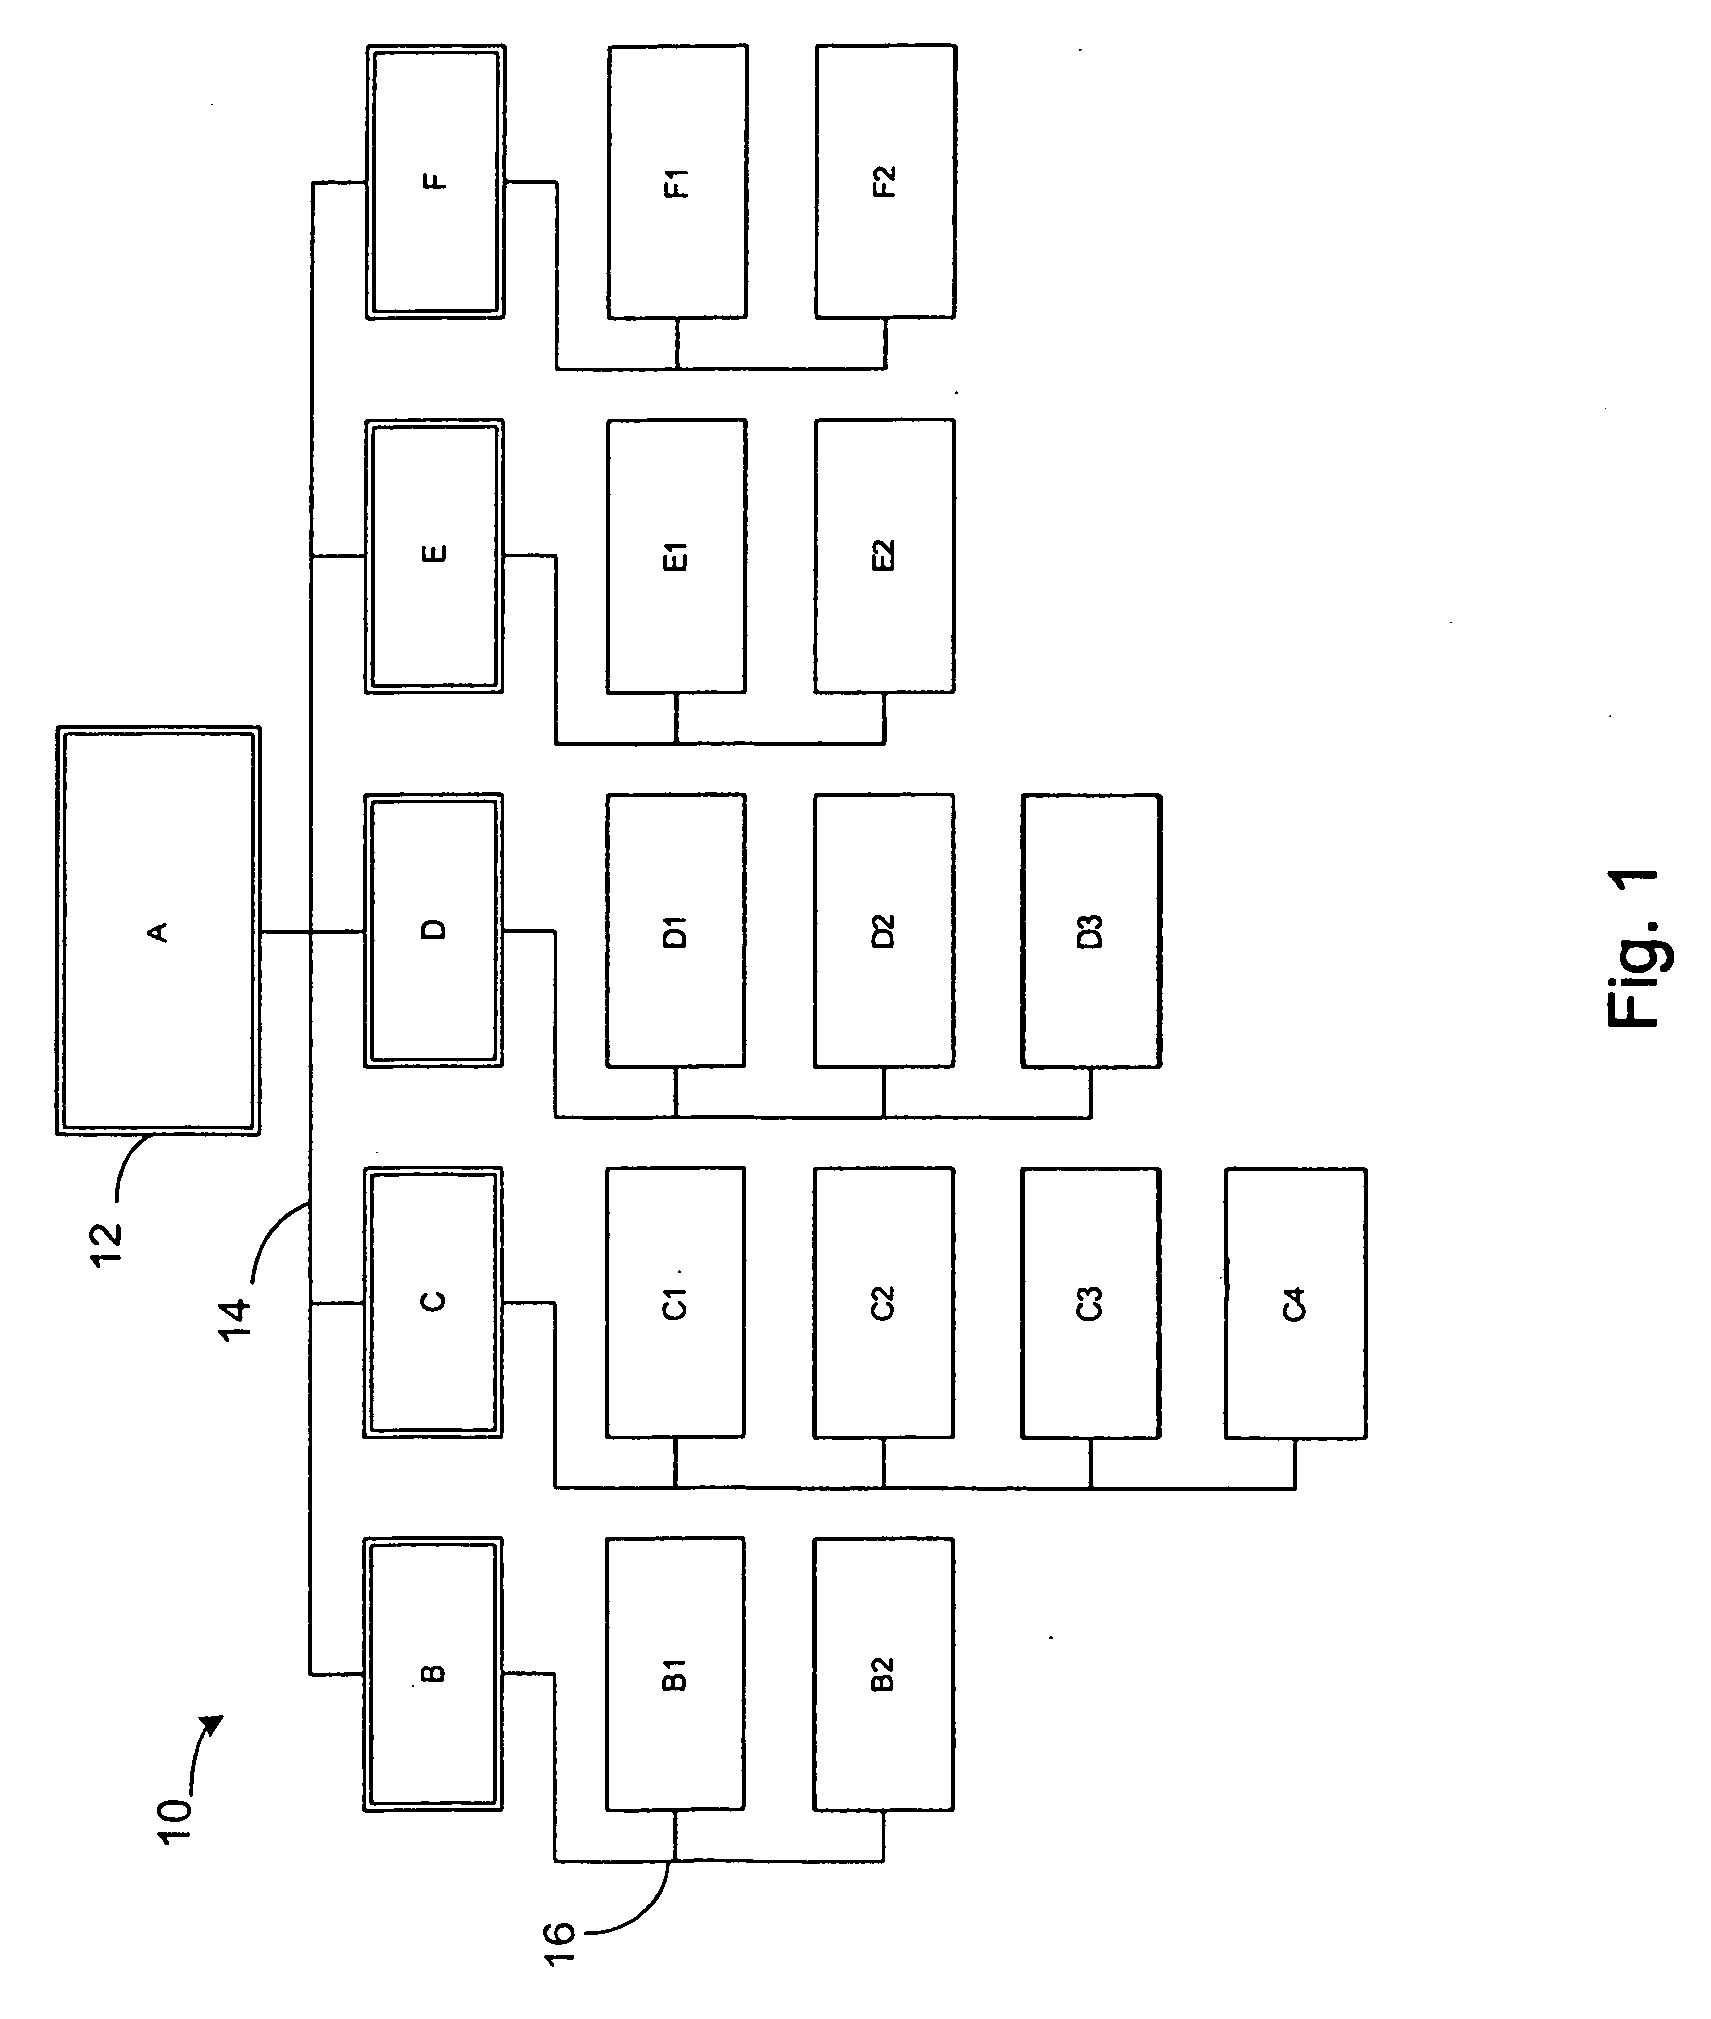 Computerized systems and methods for managing relationships